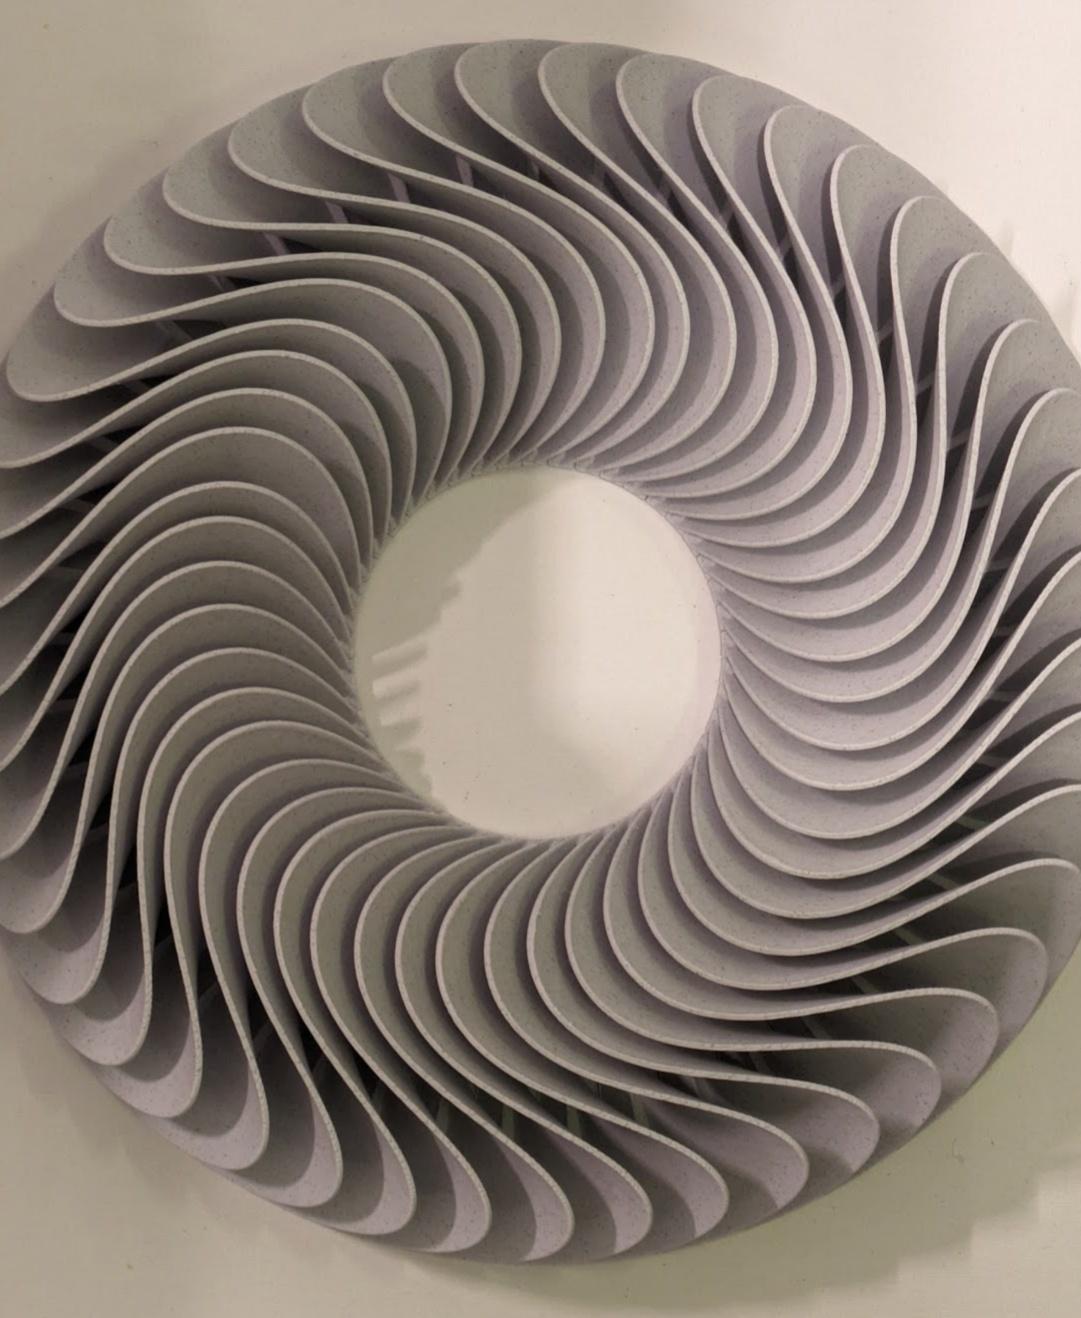 Wavey Loop Wall Sculpture - Scaled to 60% - 36.5cm diameter
Printed on Bambulab A1, 0.6mm nozzle, 0.24mm layer height.
~875g of Overture Rock PLA. - 3d model